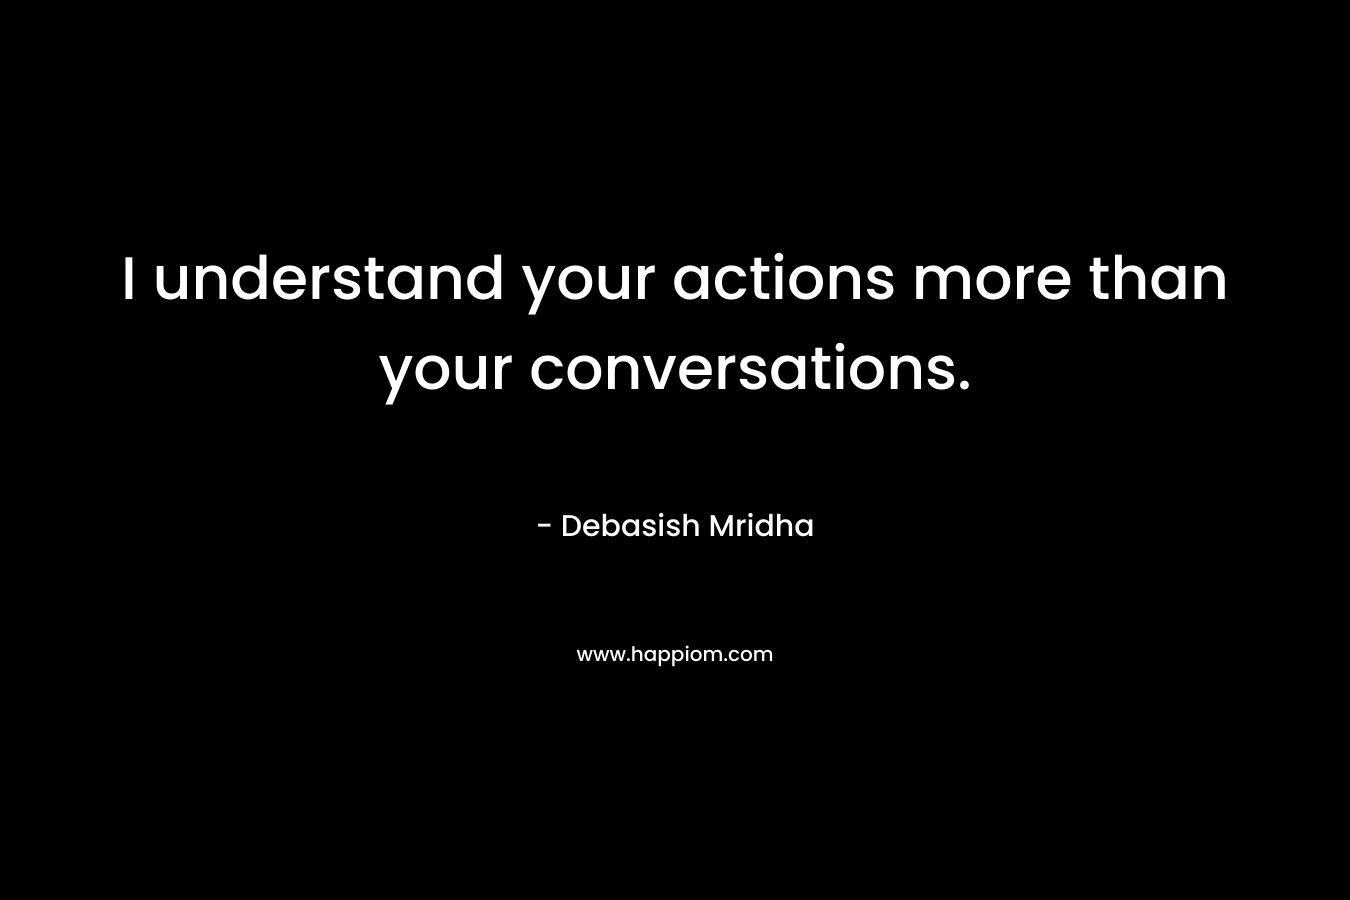 I understand your actions more than your conversations.